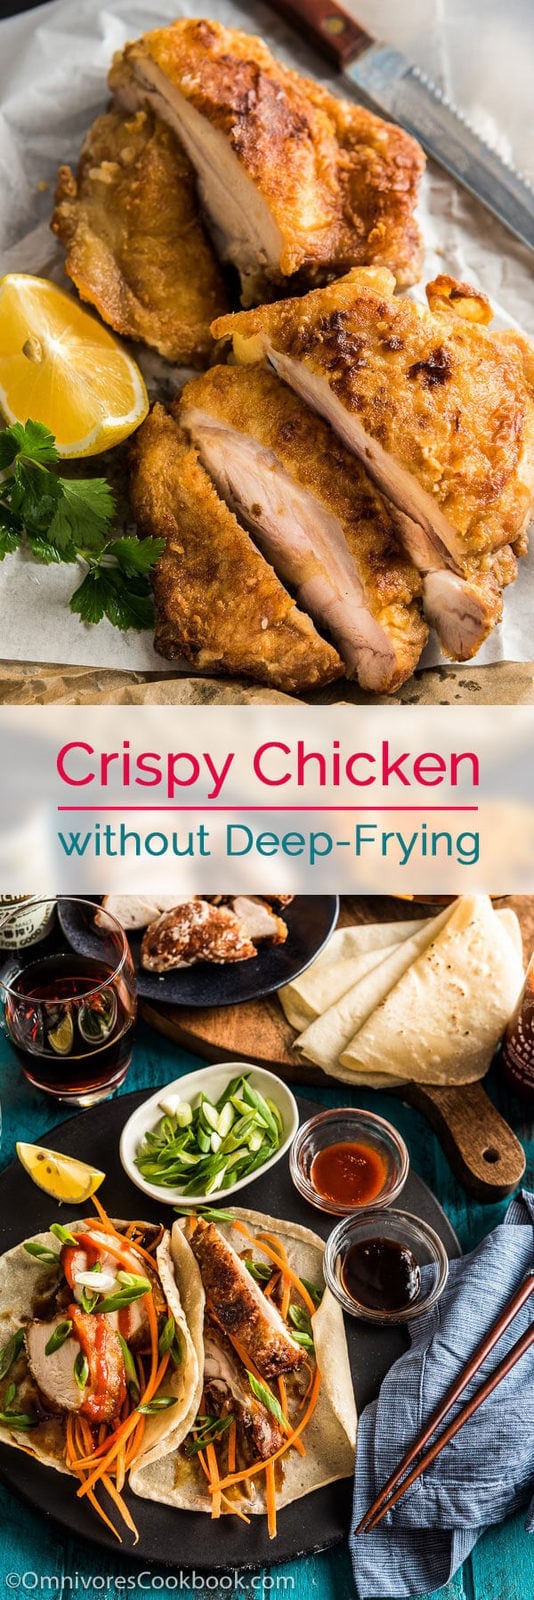 Crispy Chicken without Deep-Frying (香酥鸡) - This recipe offers a new approach to creating crispy and flavorful fried chicken on the stovetop using the minimum amount of oil. | omnivorescookbook.com